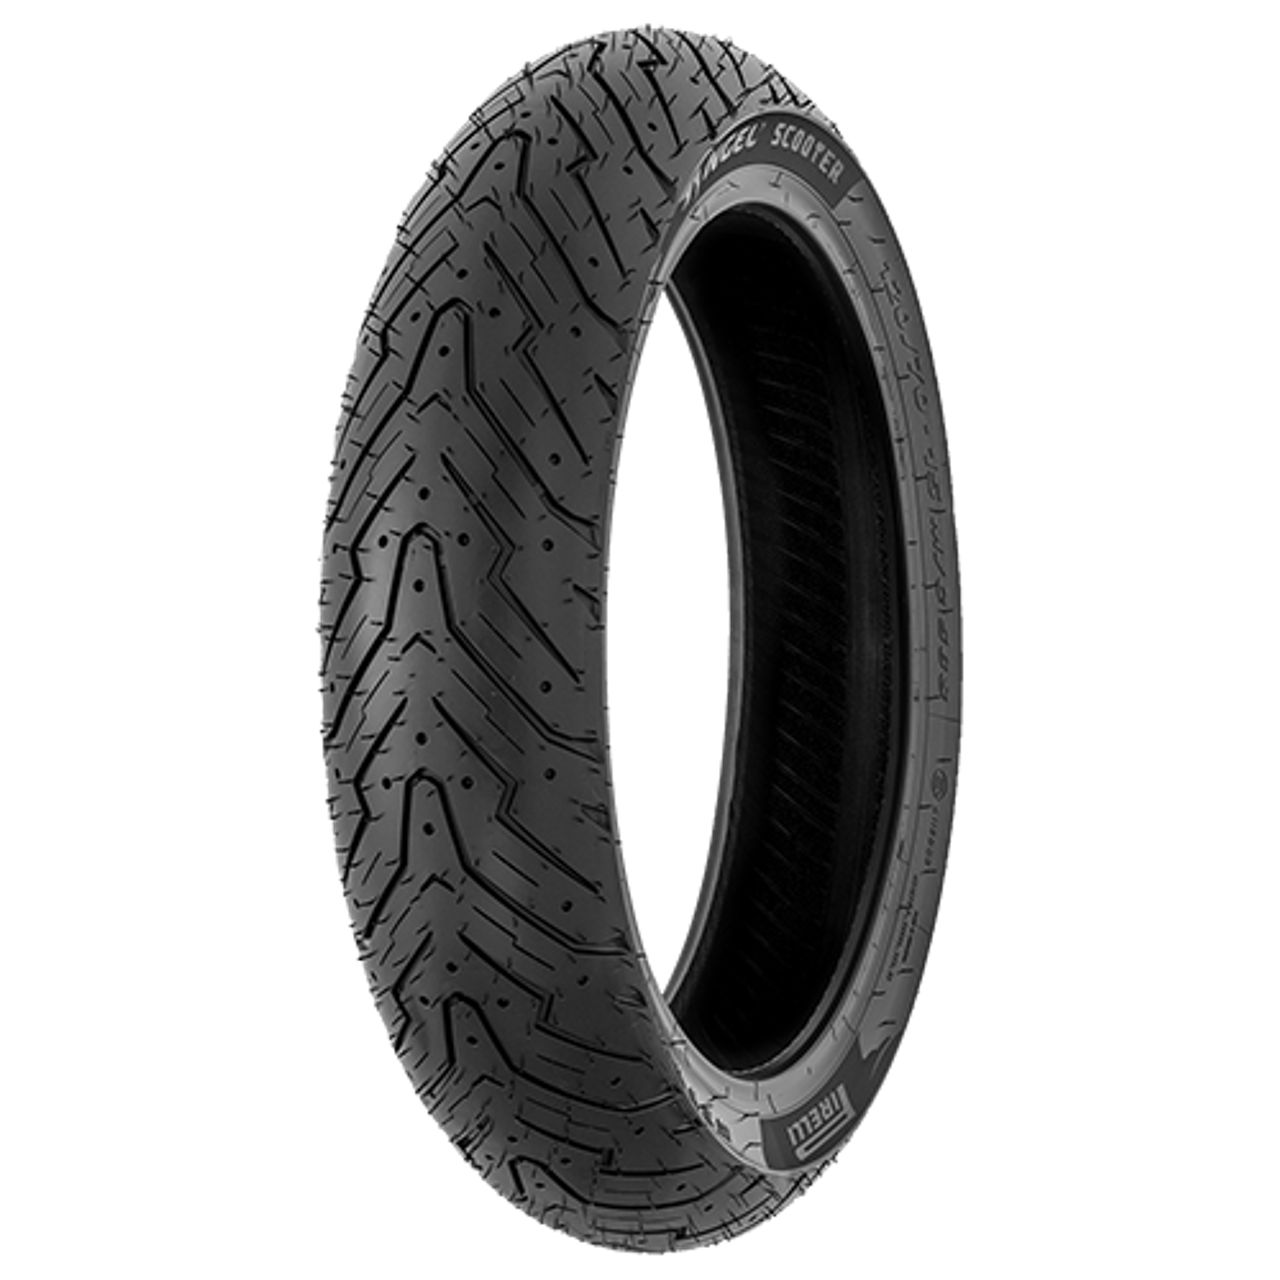 PIRELLI ANGEL SCOOTER 130/70 - 12 TL 56L BSW FRONT